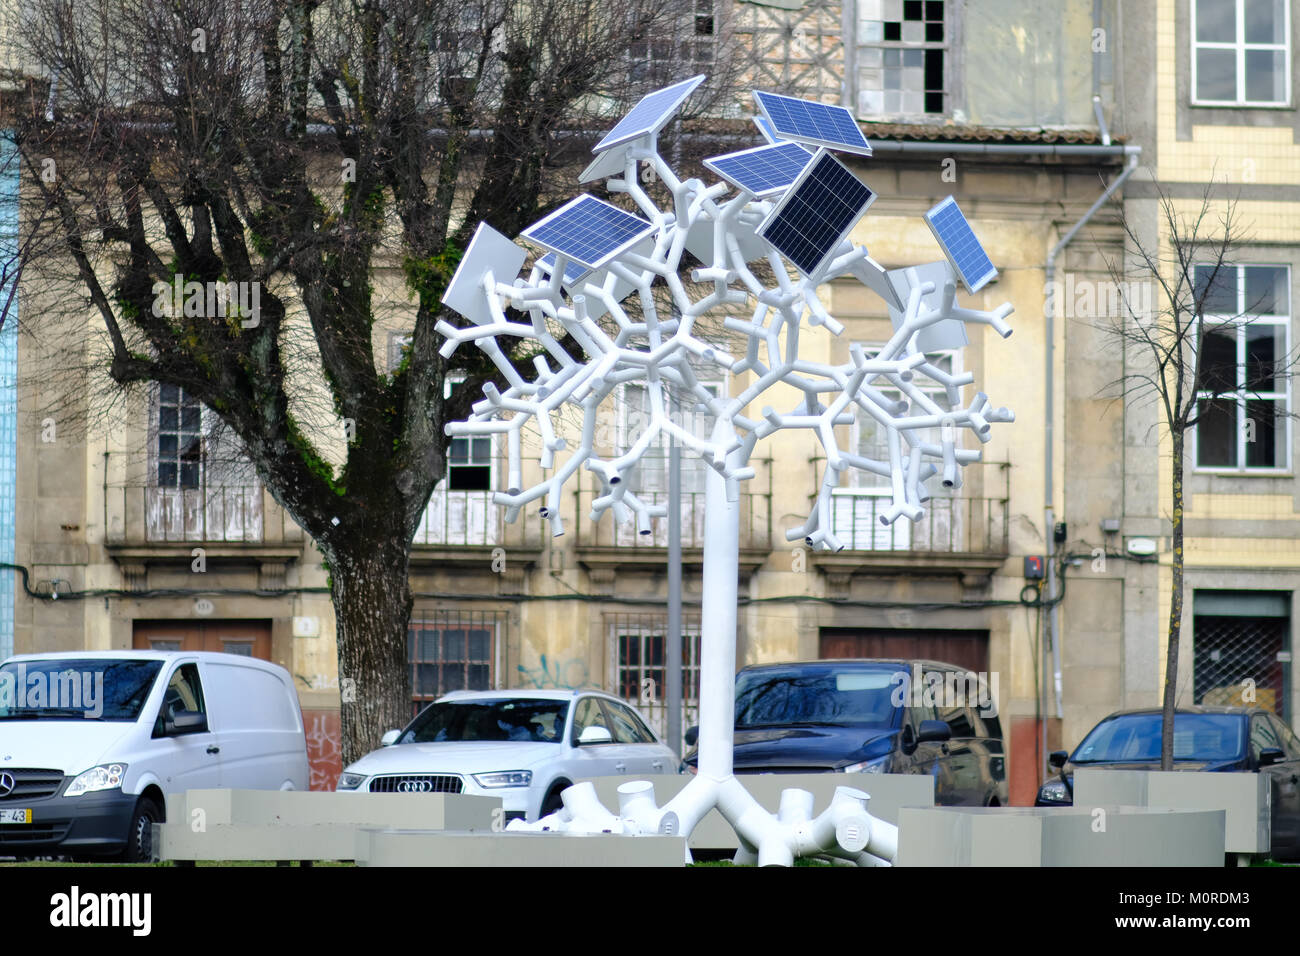 solar panels supply with energy  a tree shaped mobile charger and WiFi antenna in the main square of Braga, a city in the north of Portugal Stock Photo